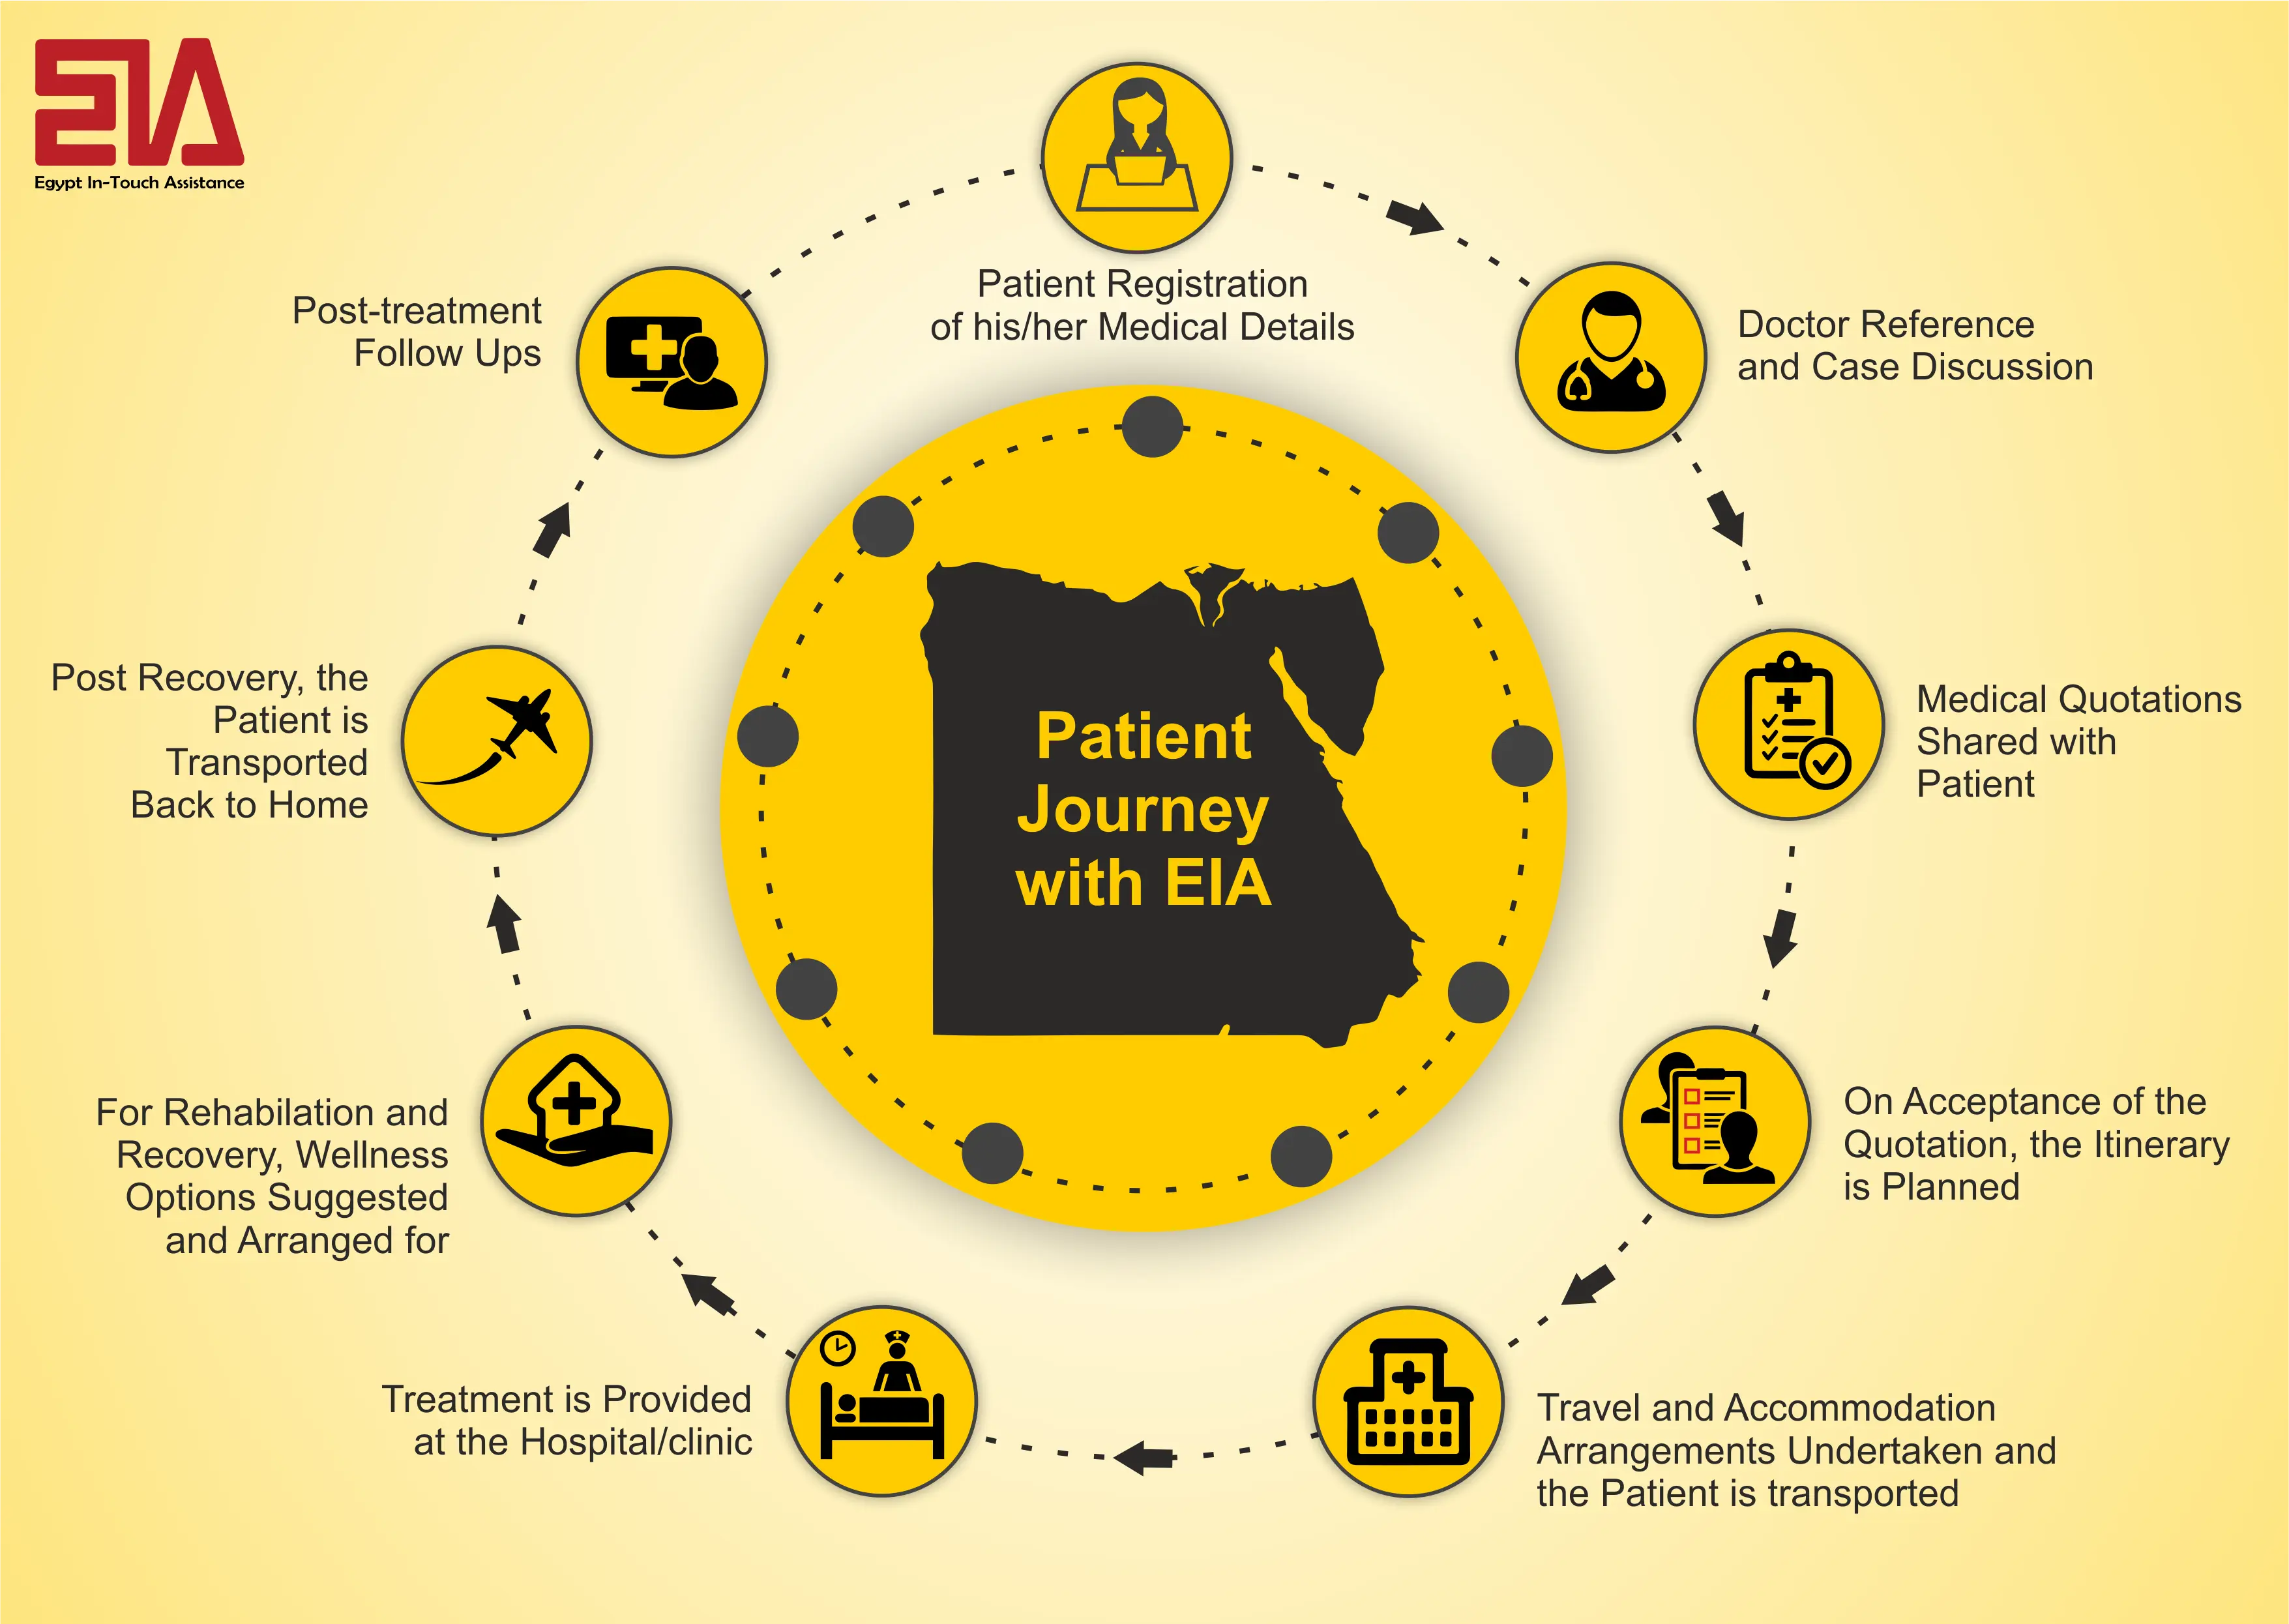 Patient journey for treatment in Egypt